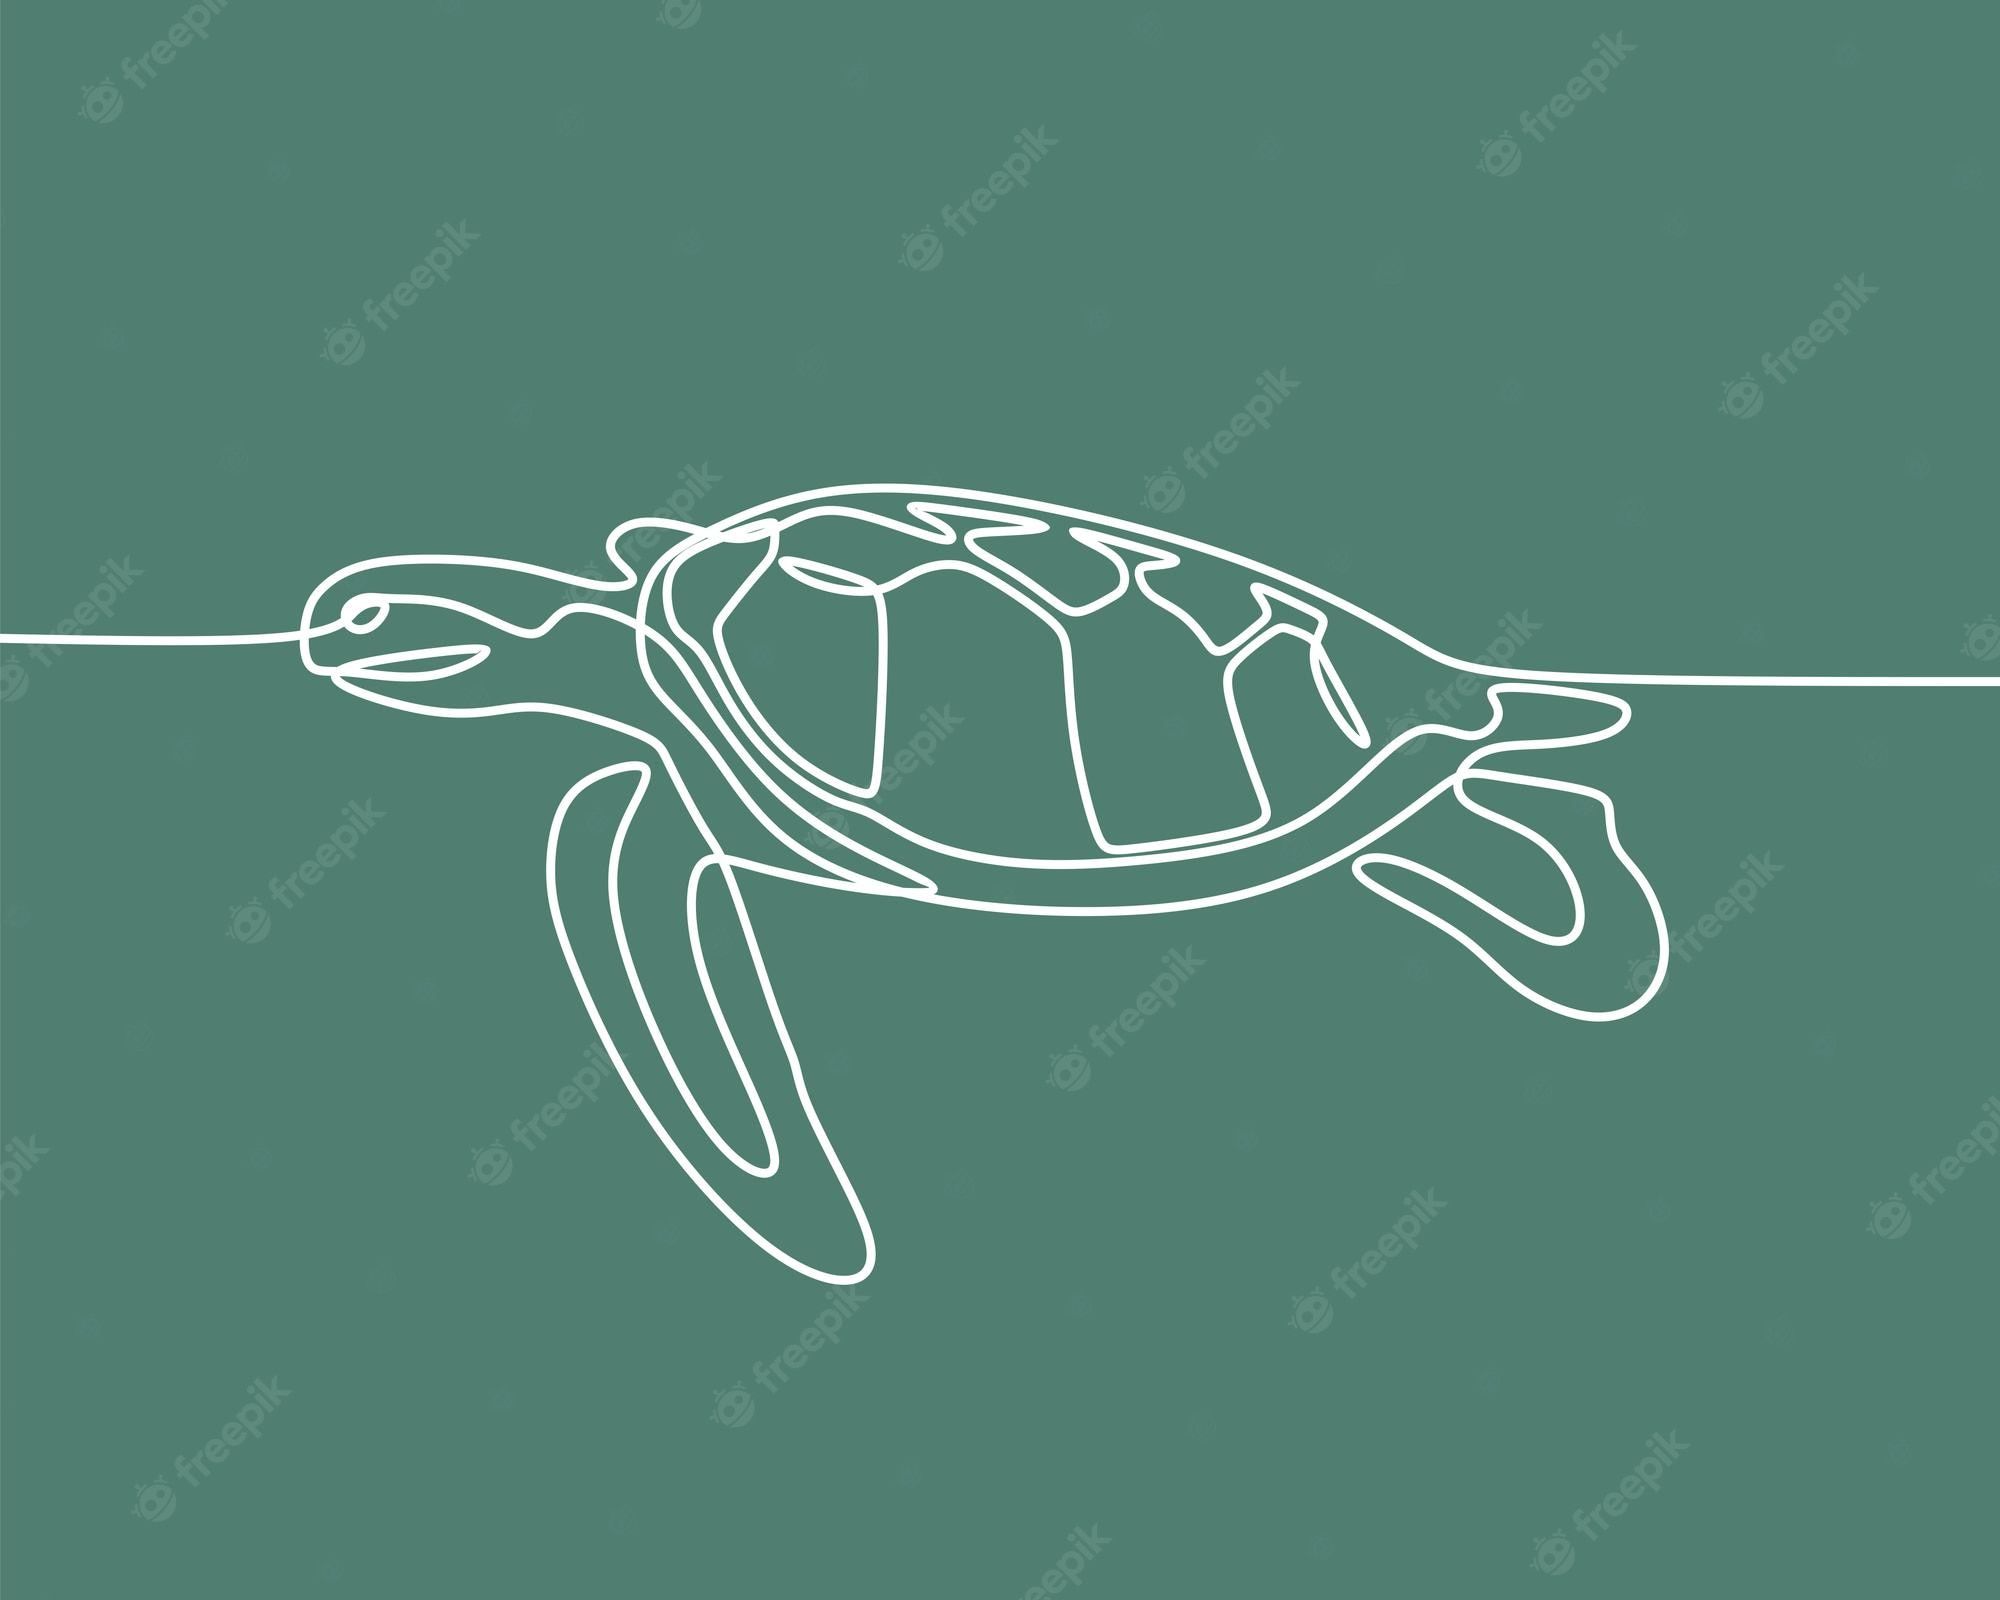 A turtle on the line, continuous drawing of an animal png and vector - Sea turtle